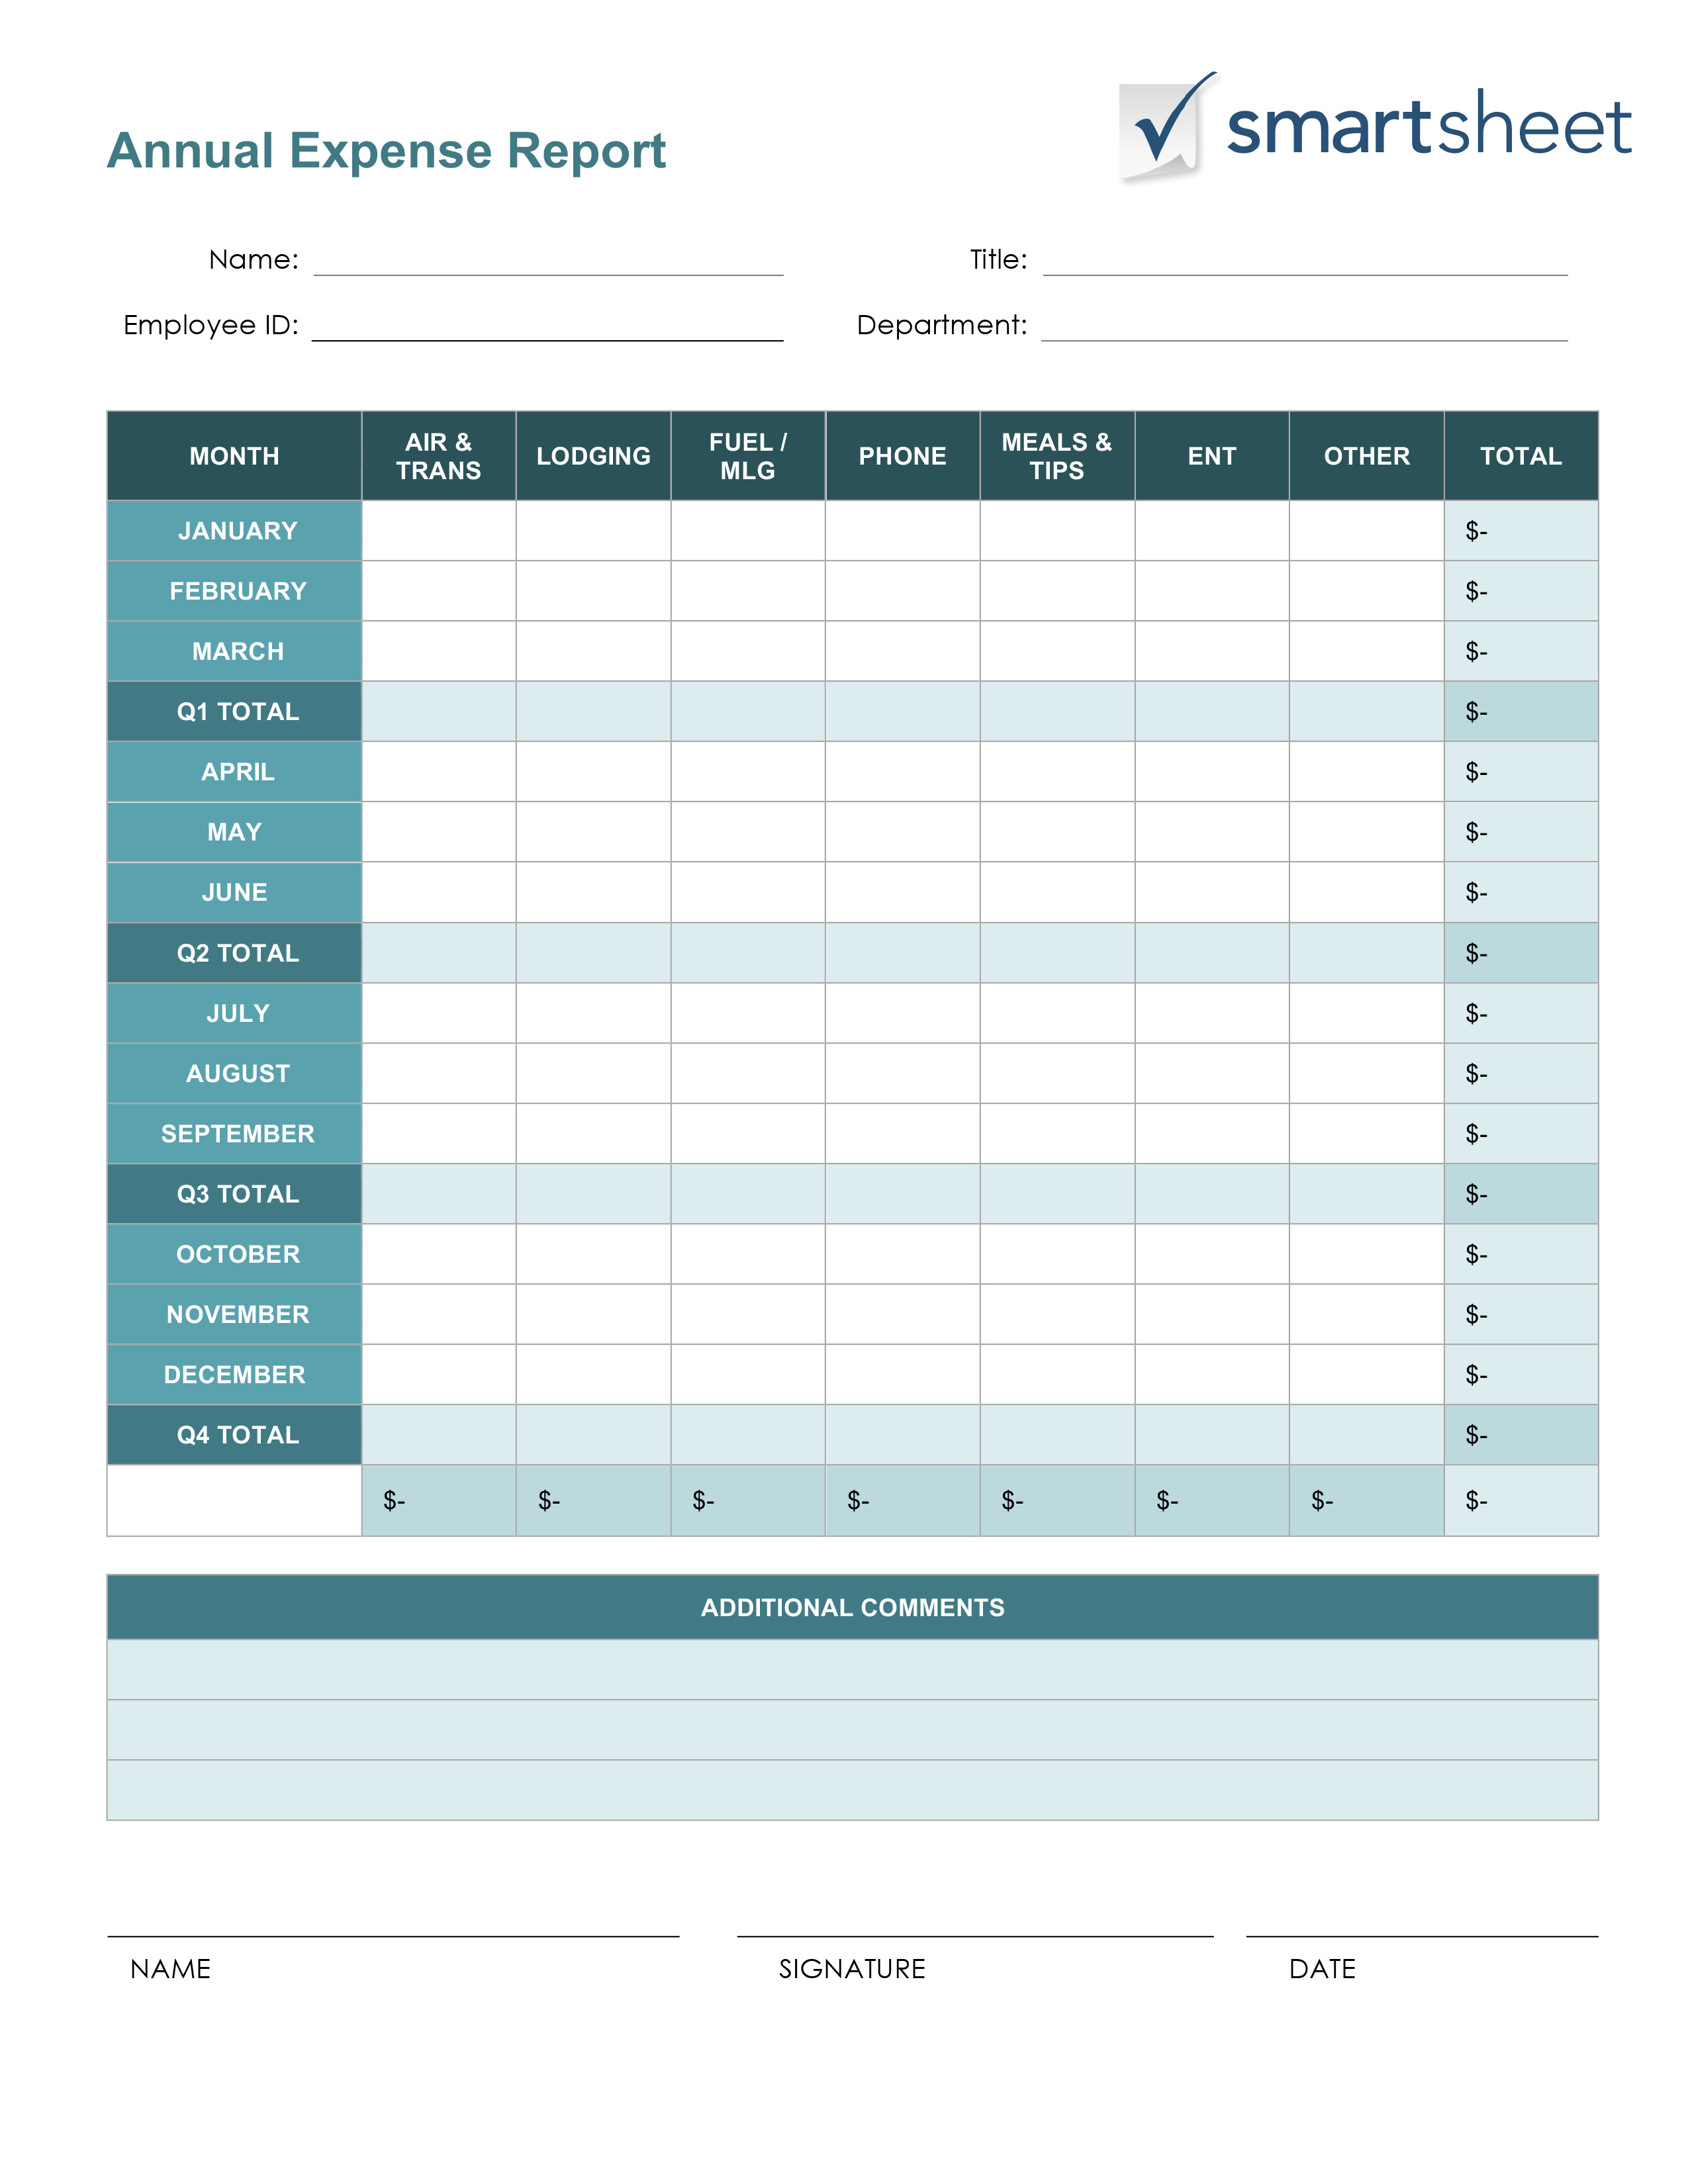 Free Expense Report Templates Smartsheet With Free Business Expense Spreadsheet Templates